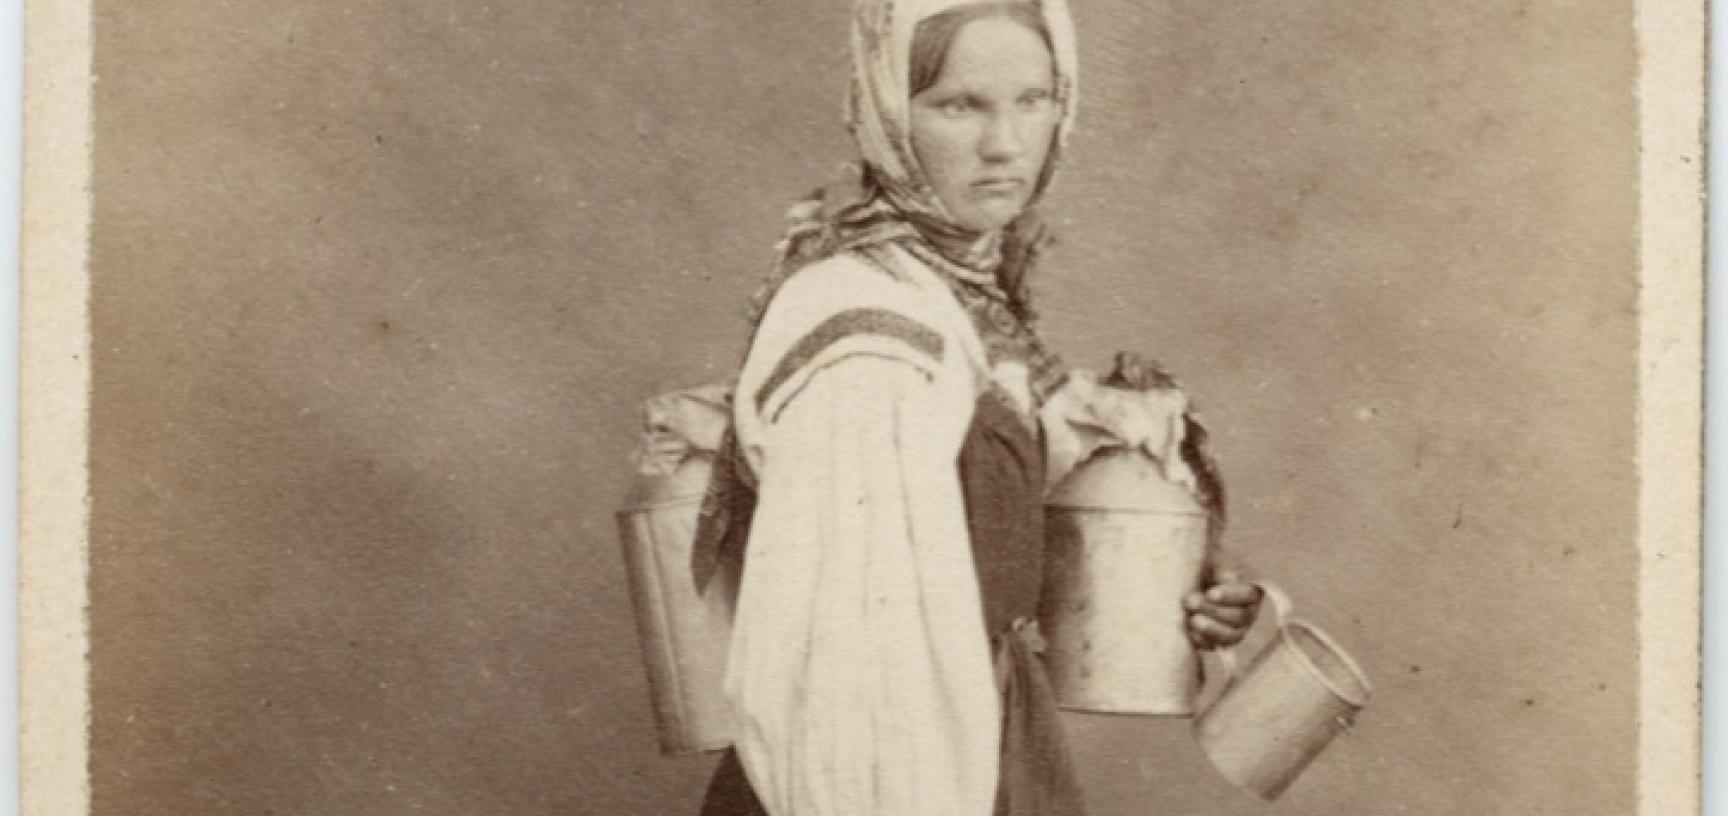 Studio portrait of a Finnish woman, a cream seller, standing, barefoot, carrying several metal jugs. Photograph by the William Carrick studio. St Petersburg, Russia. 1860s. (Copyright Pitt Rivers Museum, University of Oxford. Accession Number: 1941.8.135)